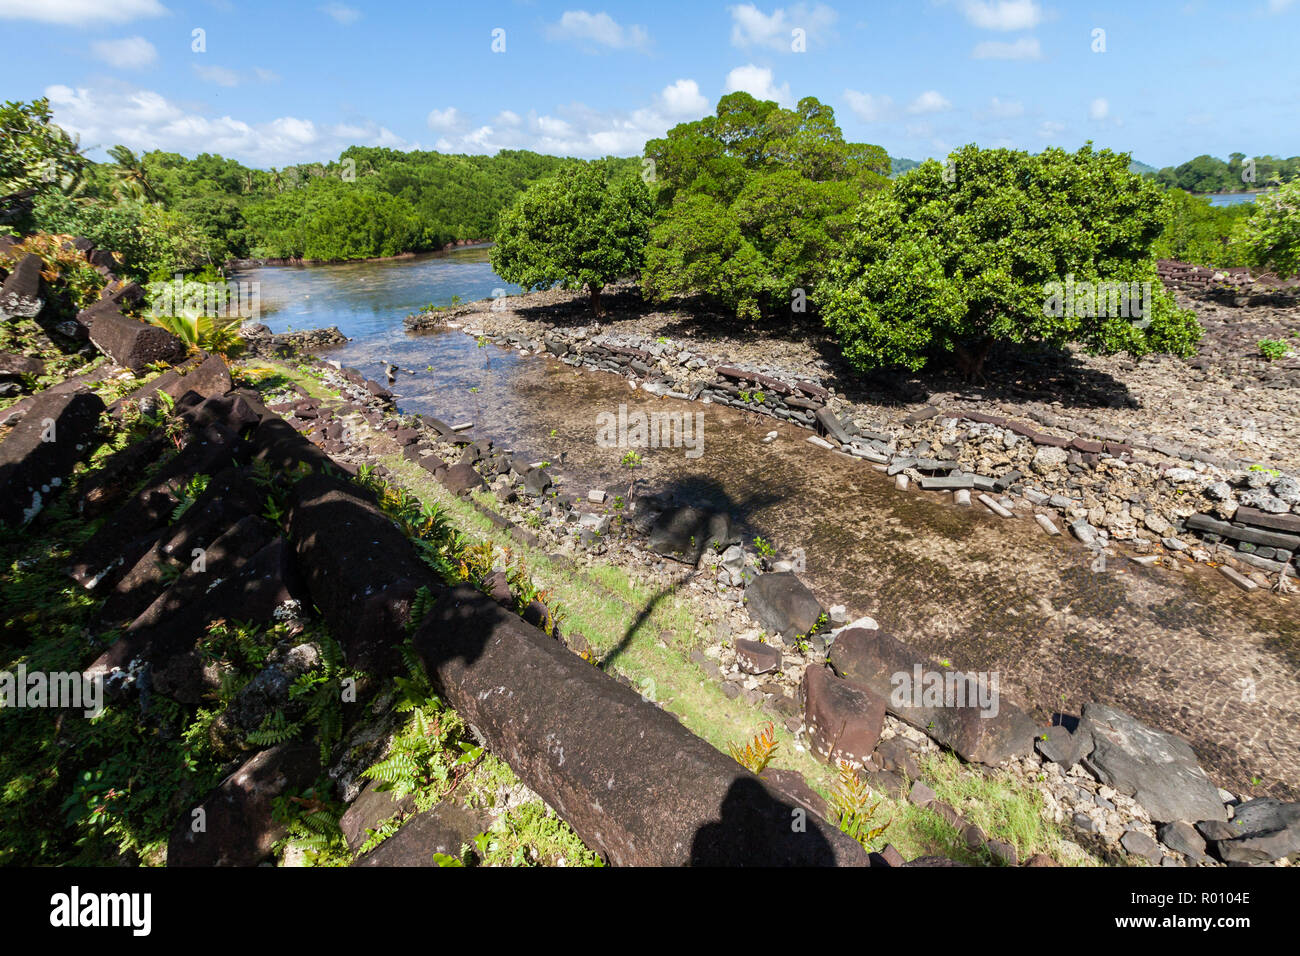 Walls and canals of Nandowas part of Nan Madol - prehistoric ruined stone city. Pohnpei, Micronesia, Oceania. Shadow of a palm tree on the water. Stock Photo